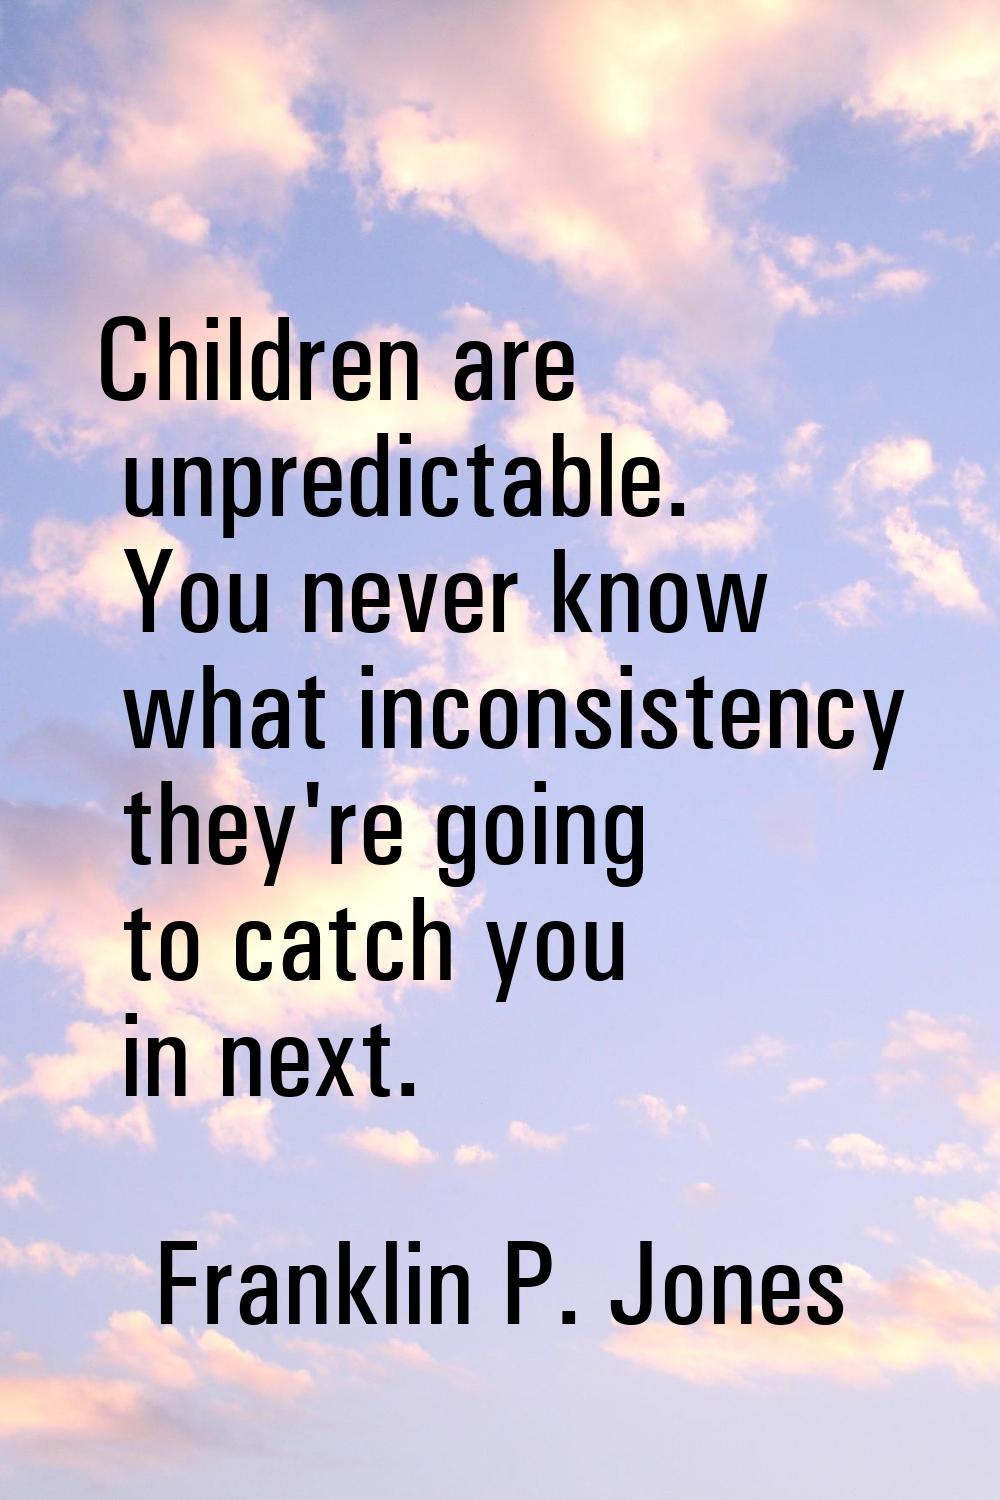 Children are unpredictable. You never know what inconsistency they're going to catch you in next.